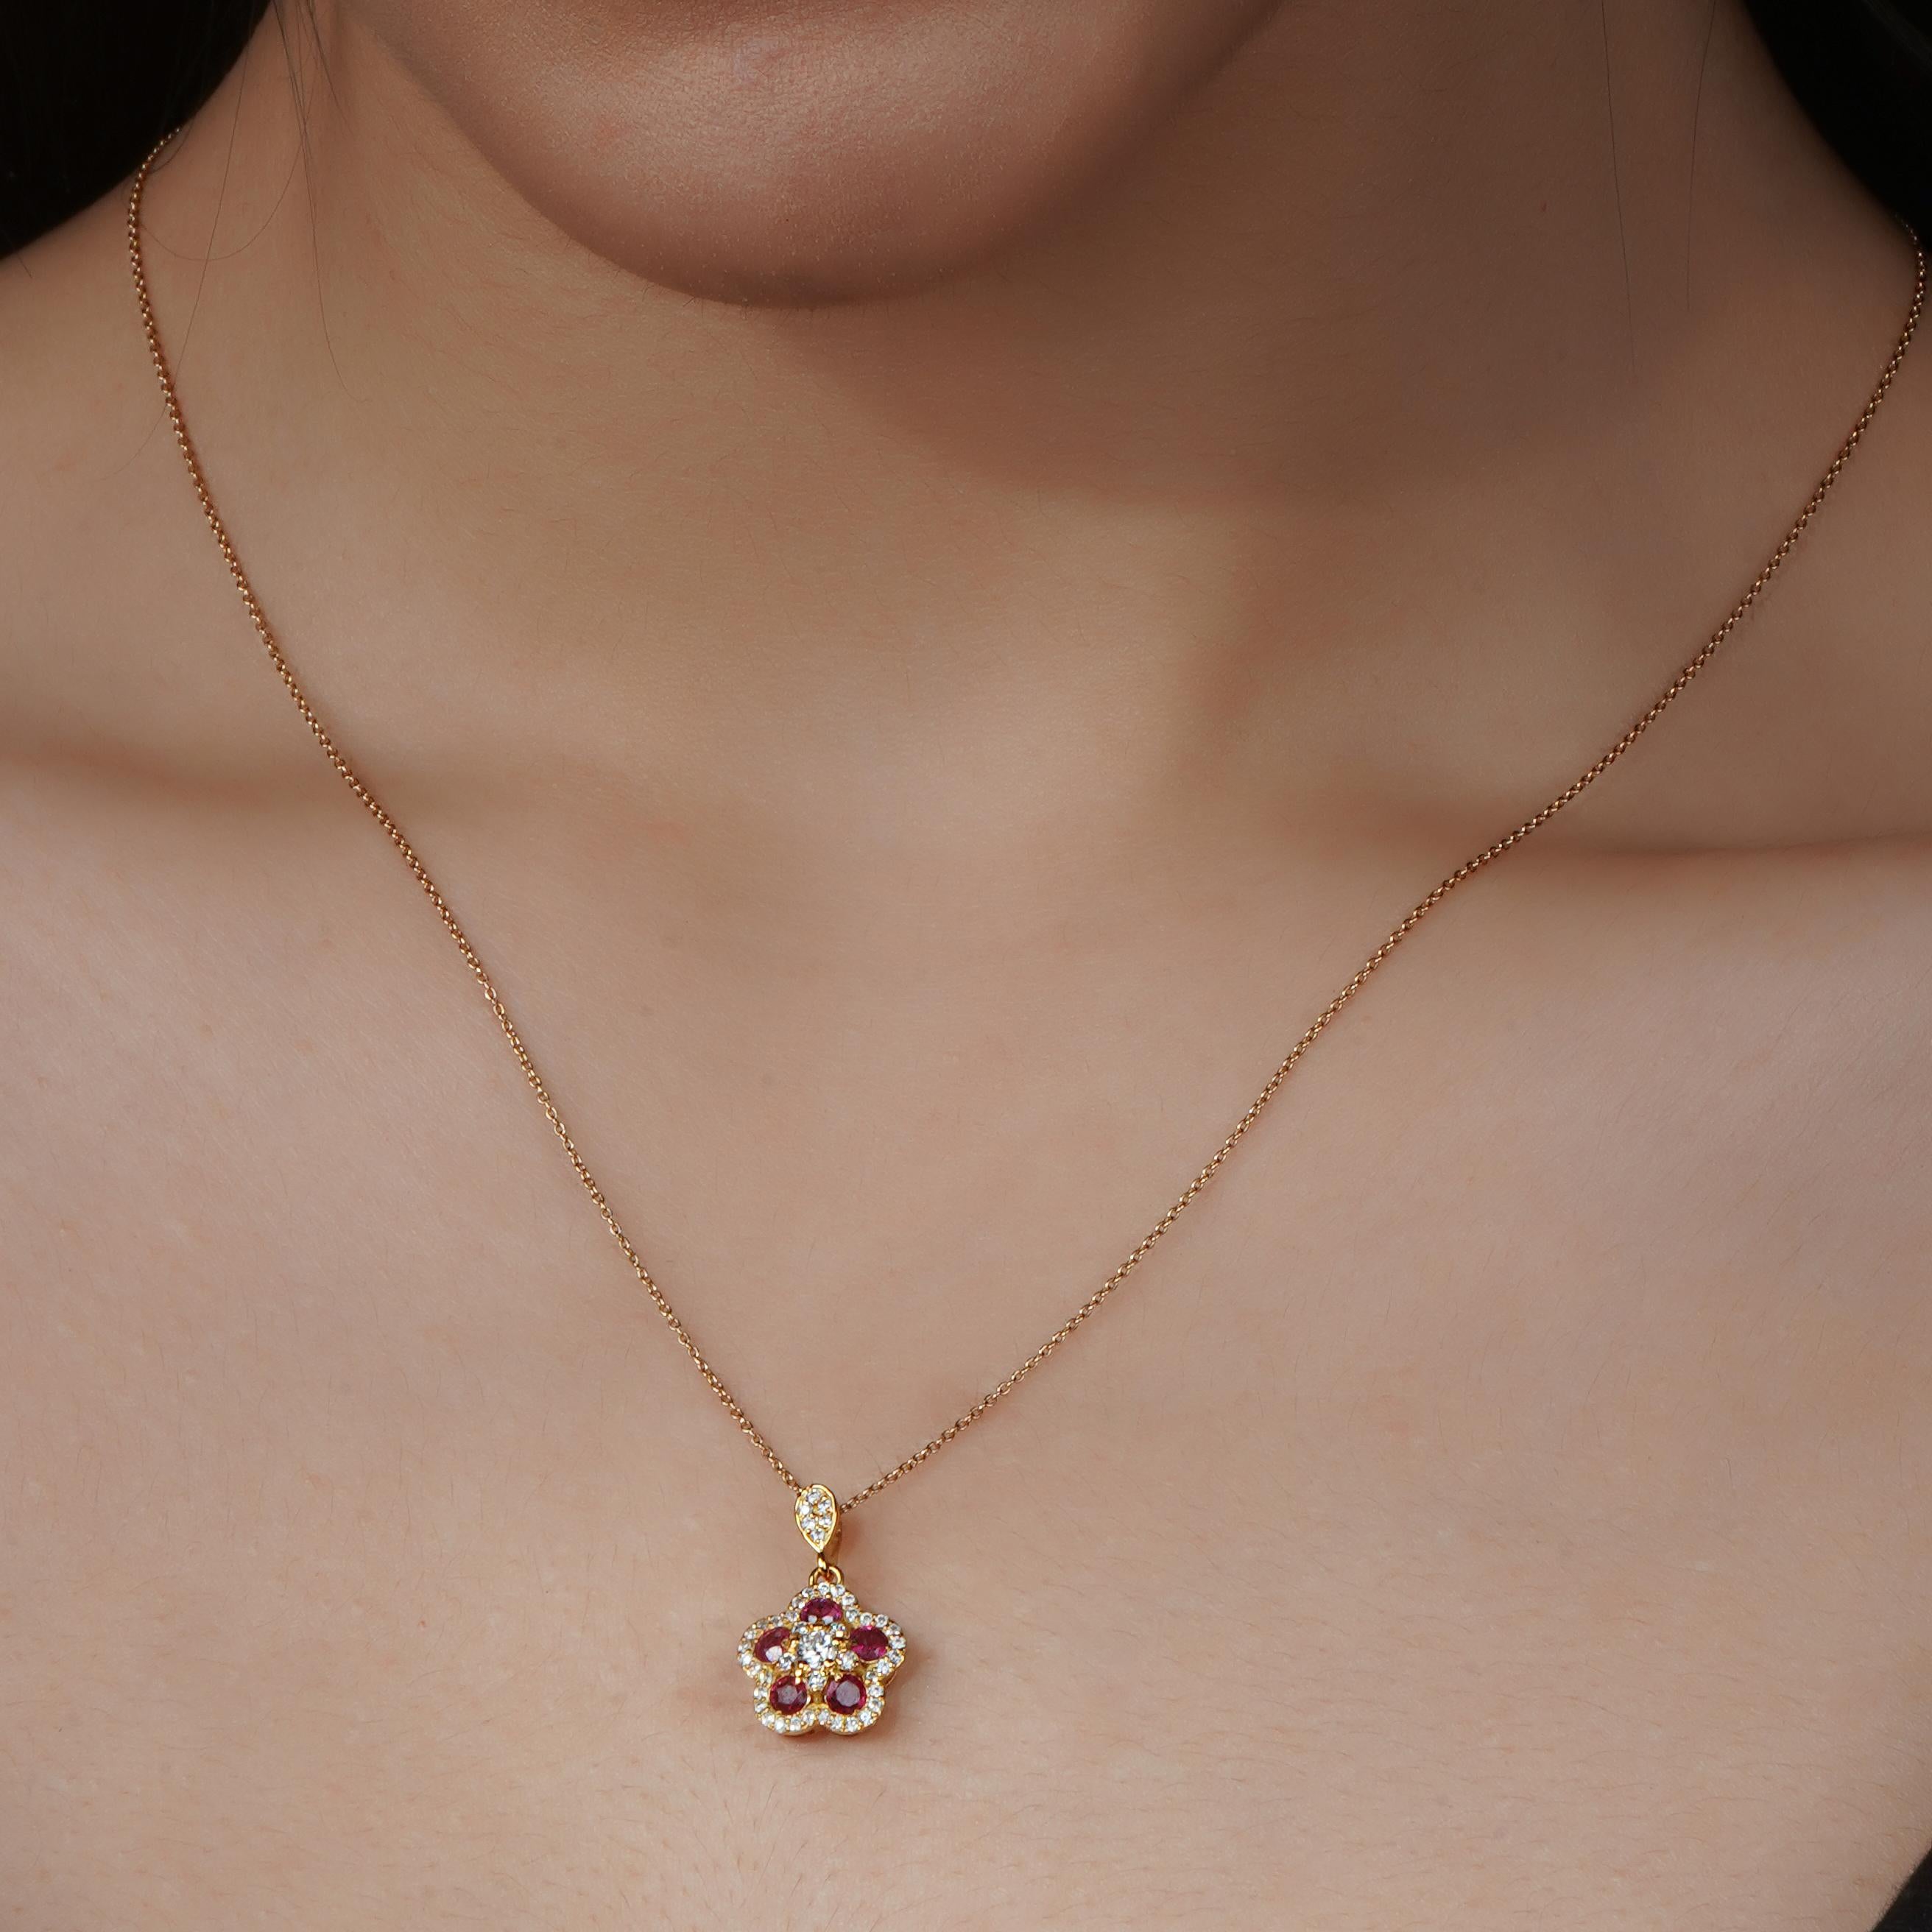 If you are looking for a unique and meaningful gift for yourself or someone special, you will love our 18k solid gold Glory pendant!

**This item includes the chain**

This pendant is not just a beautiful accessory, but also a symbol of your